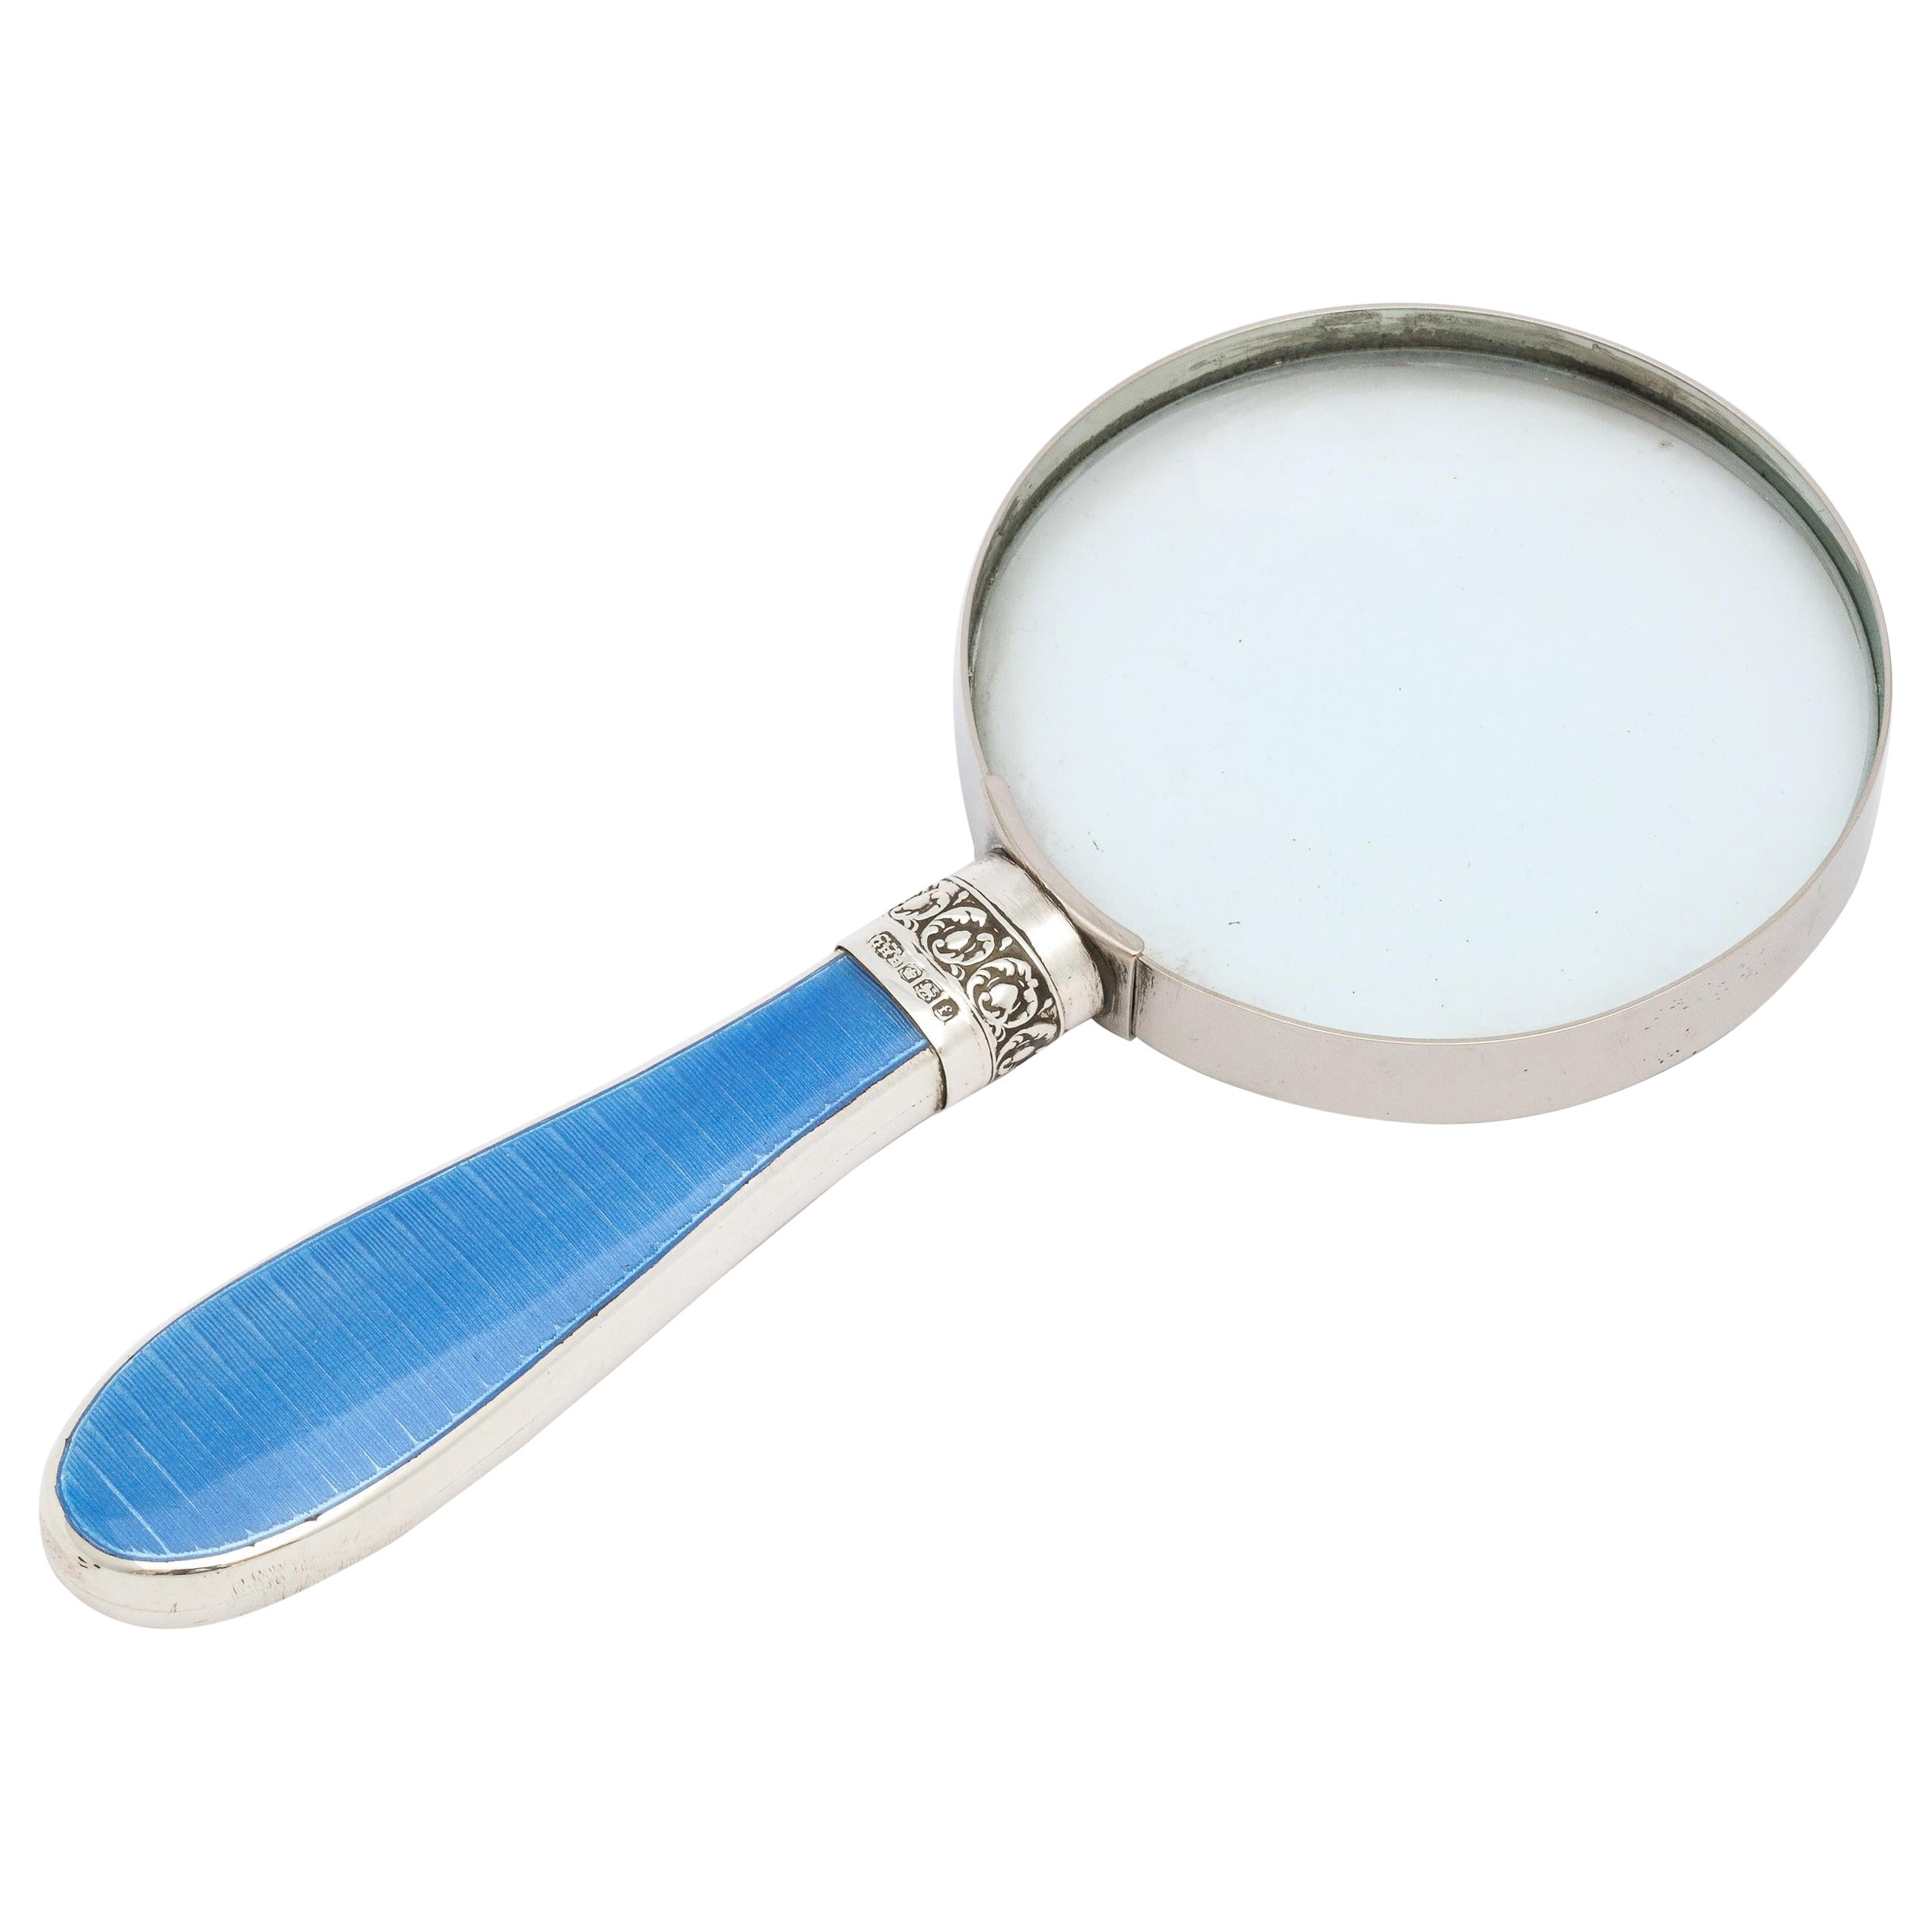 Art Deco Sterling Silver and Blue Guilloche Enamel-Mounted Magnifying Glass